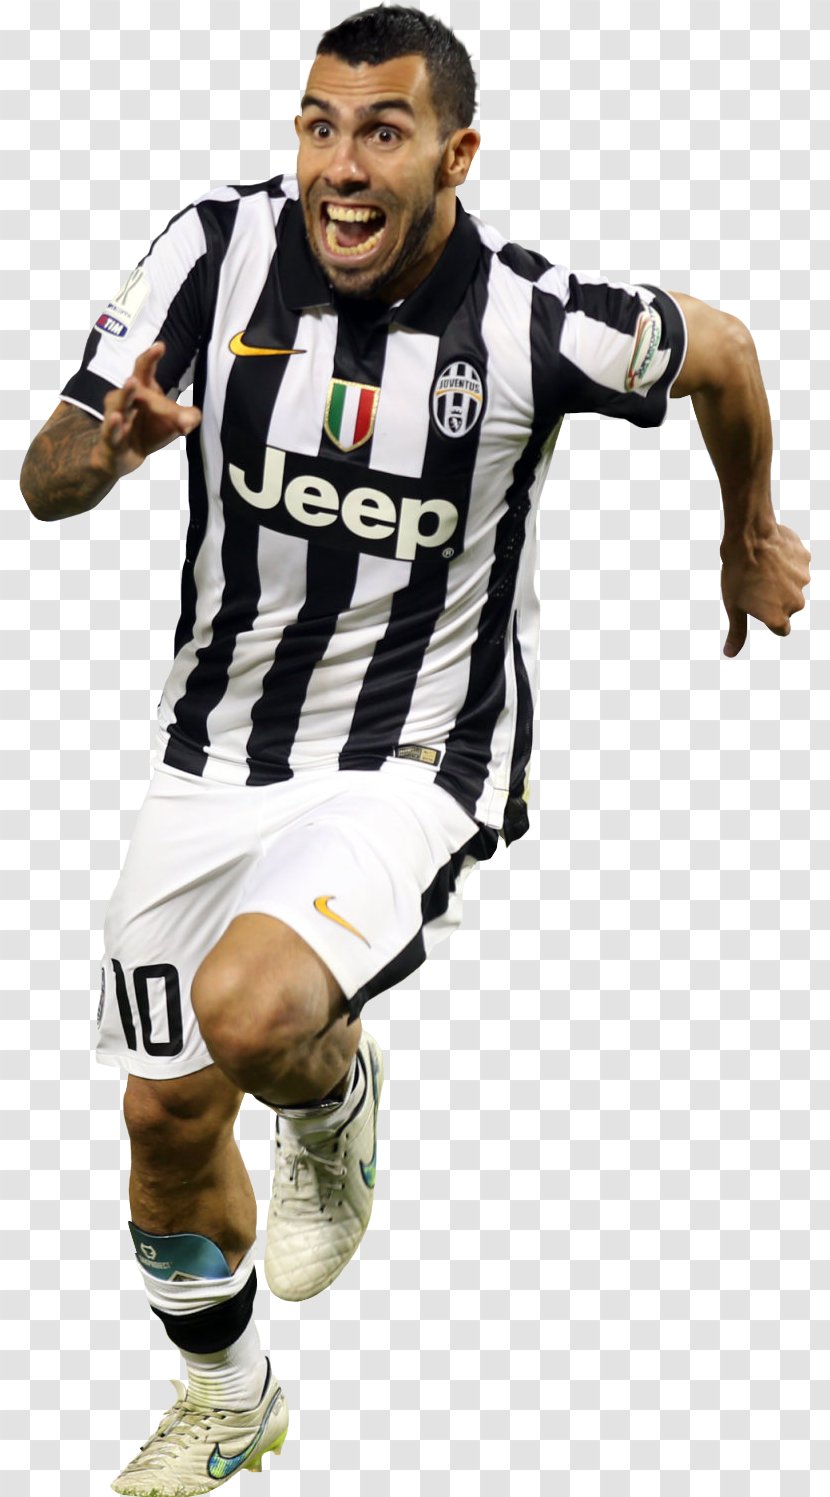 Carlos Tevez Juventus F.C. UEFA Champions League Manchester City American Football Protective Gear - Equipment And Supplies Transparent PNG